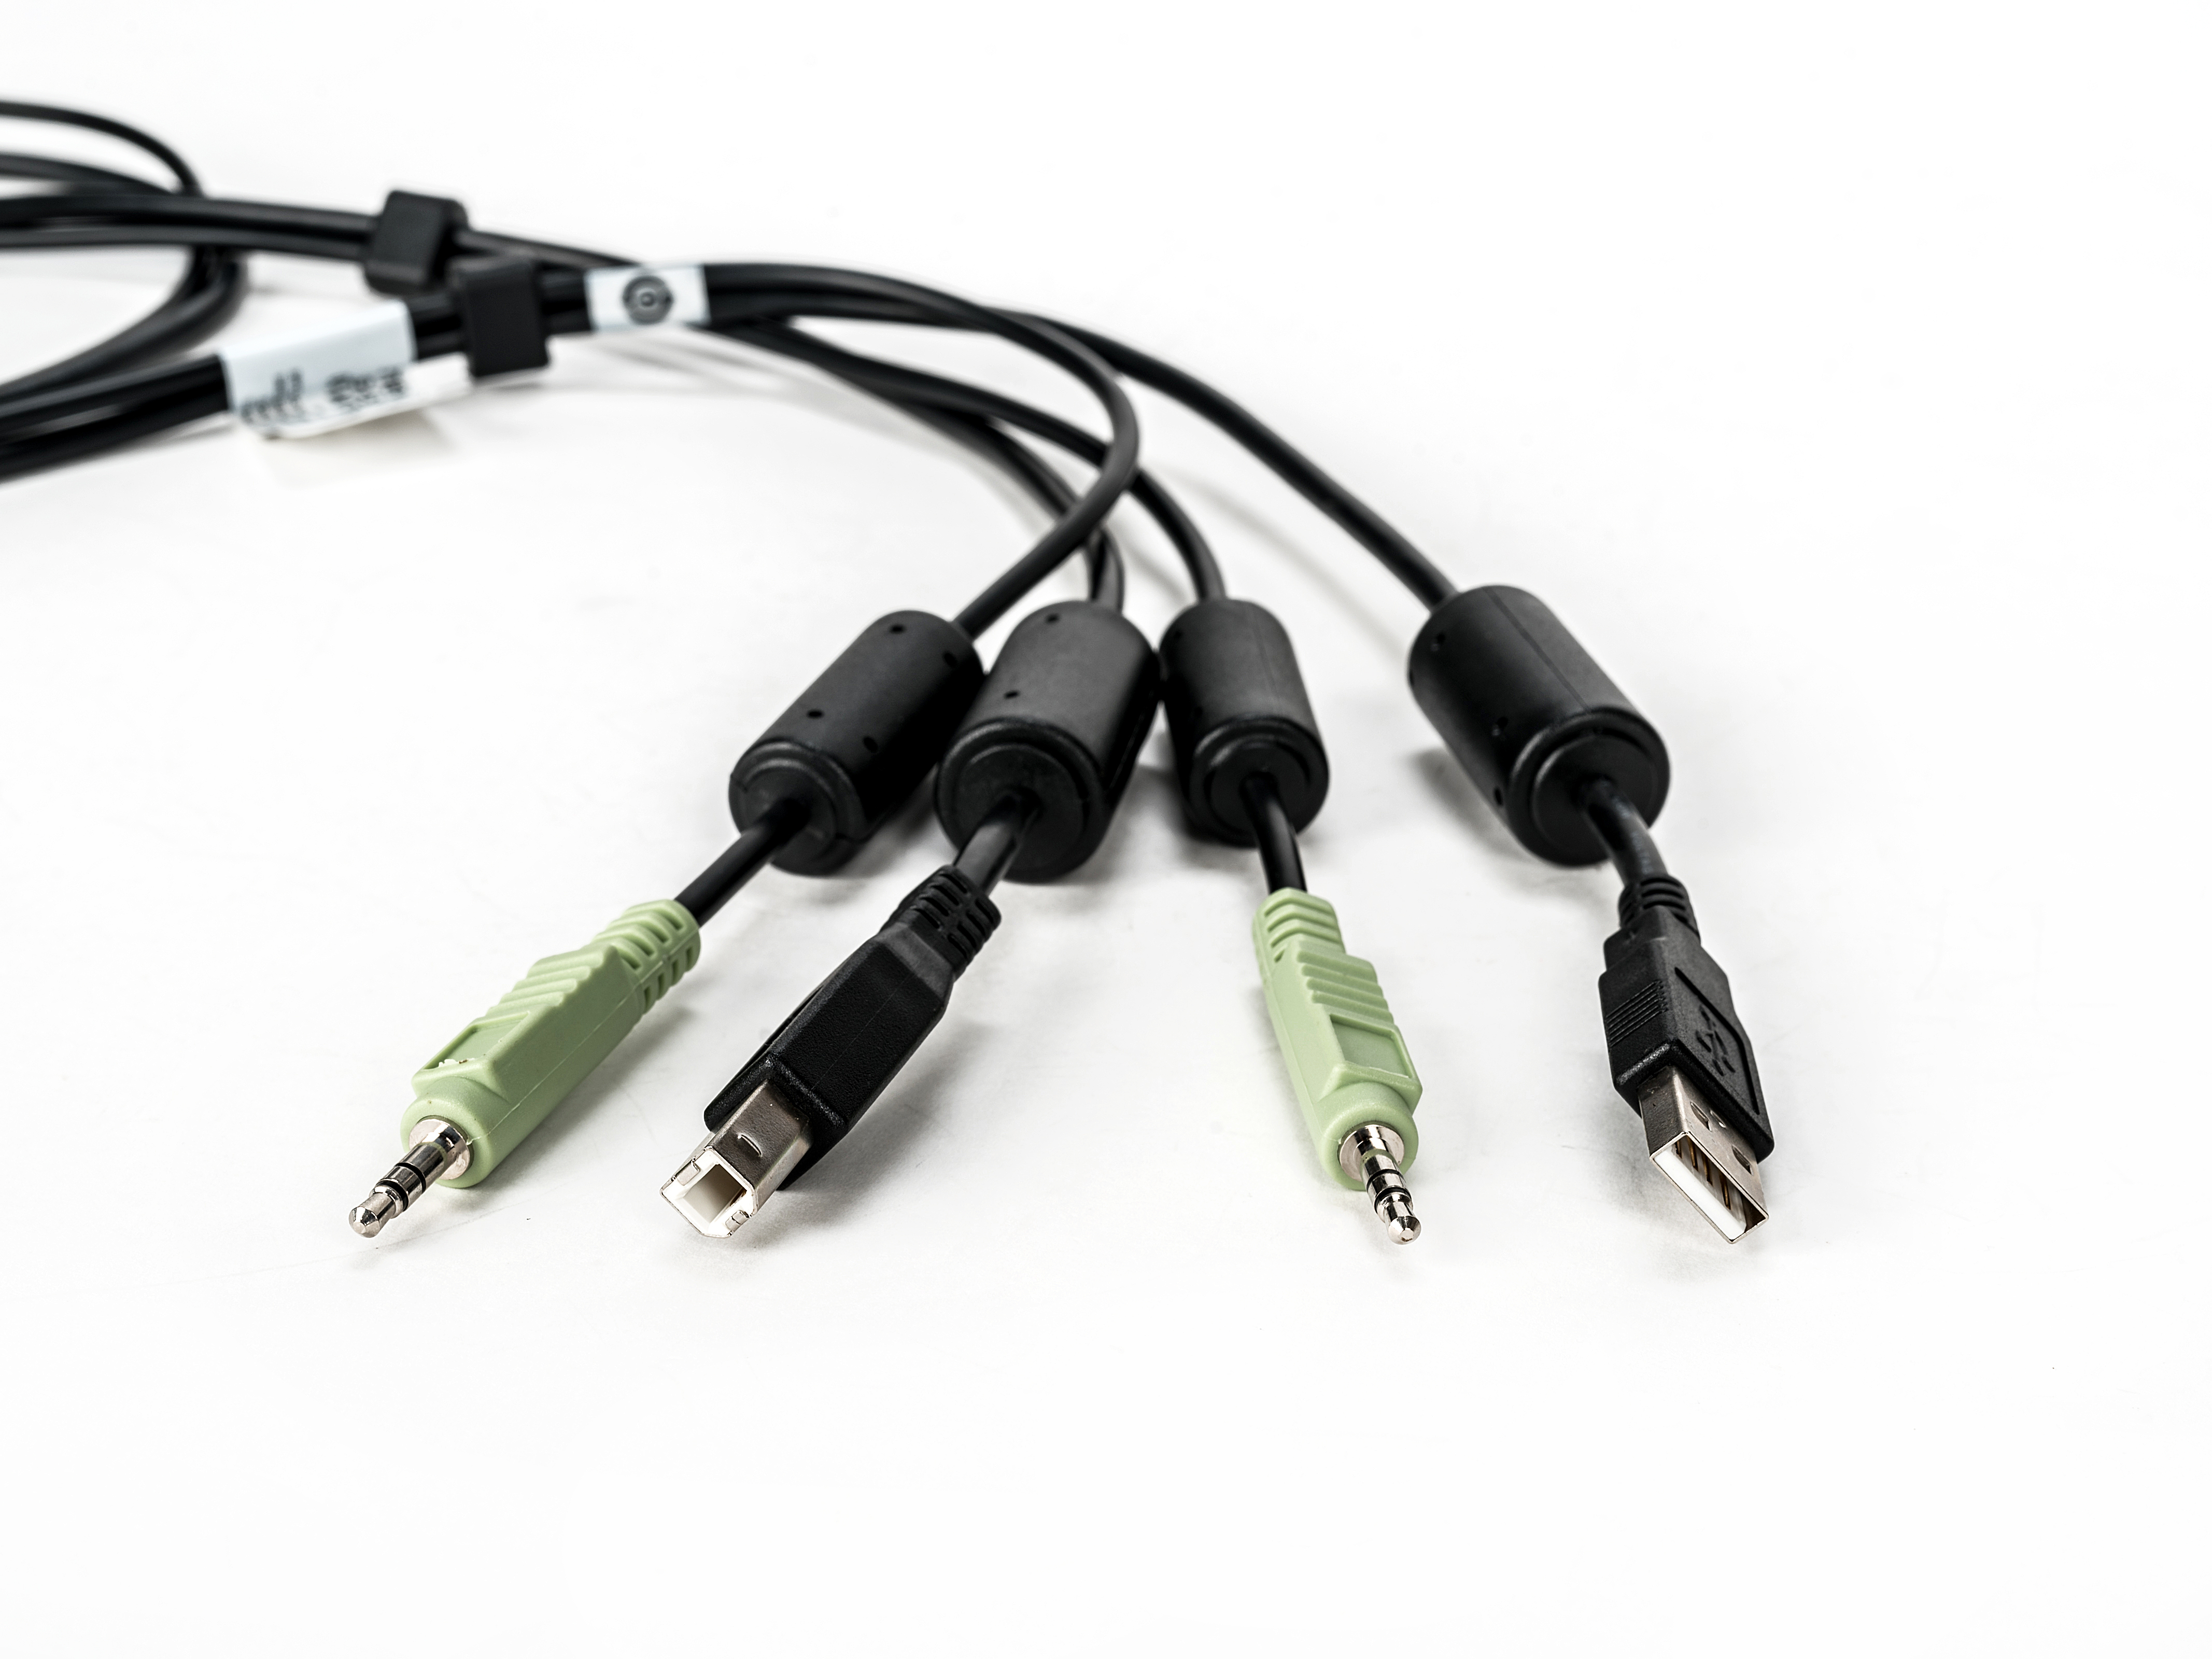 CABLE ASSY 1-USB/1-AUDIO 6FT (SCKM140)